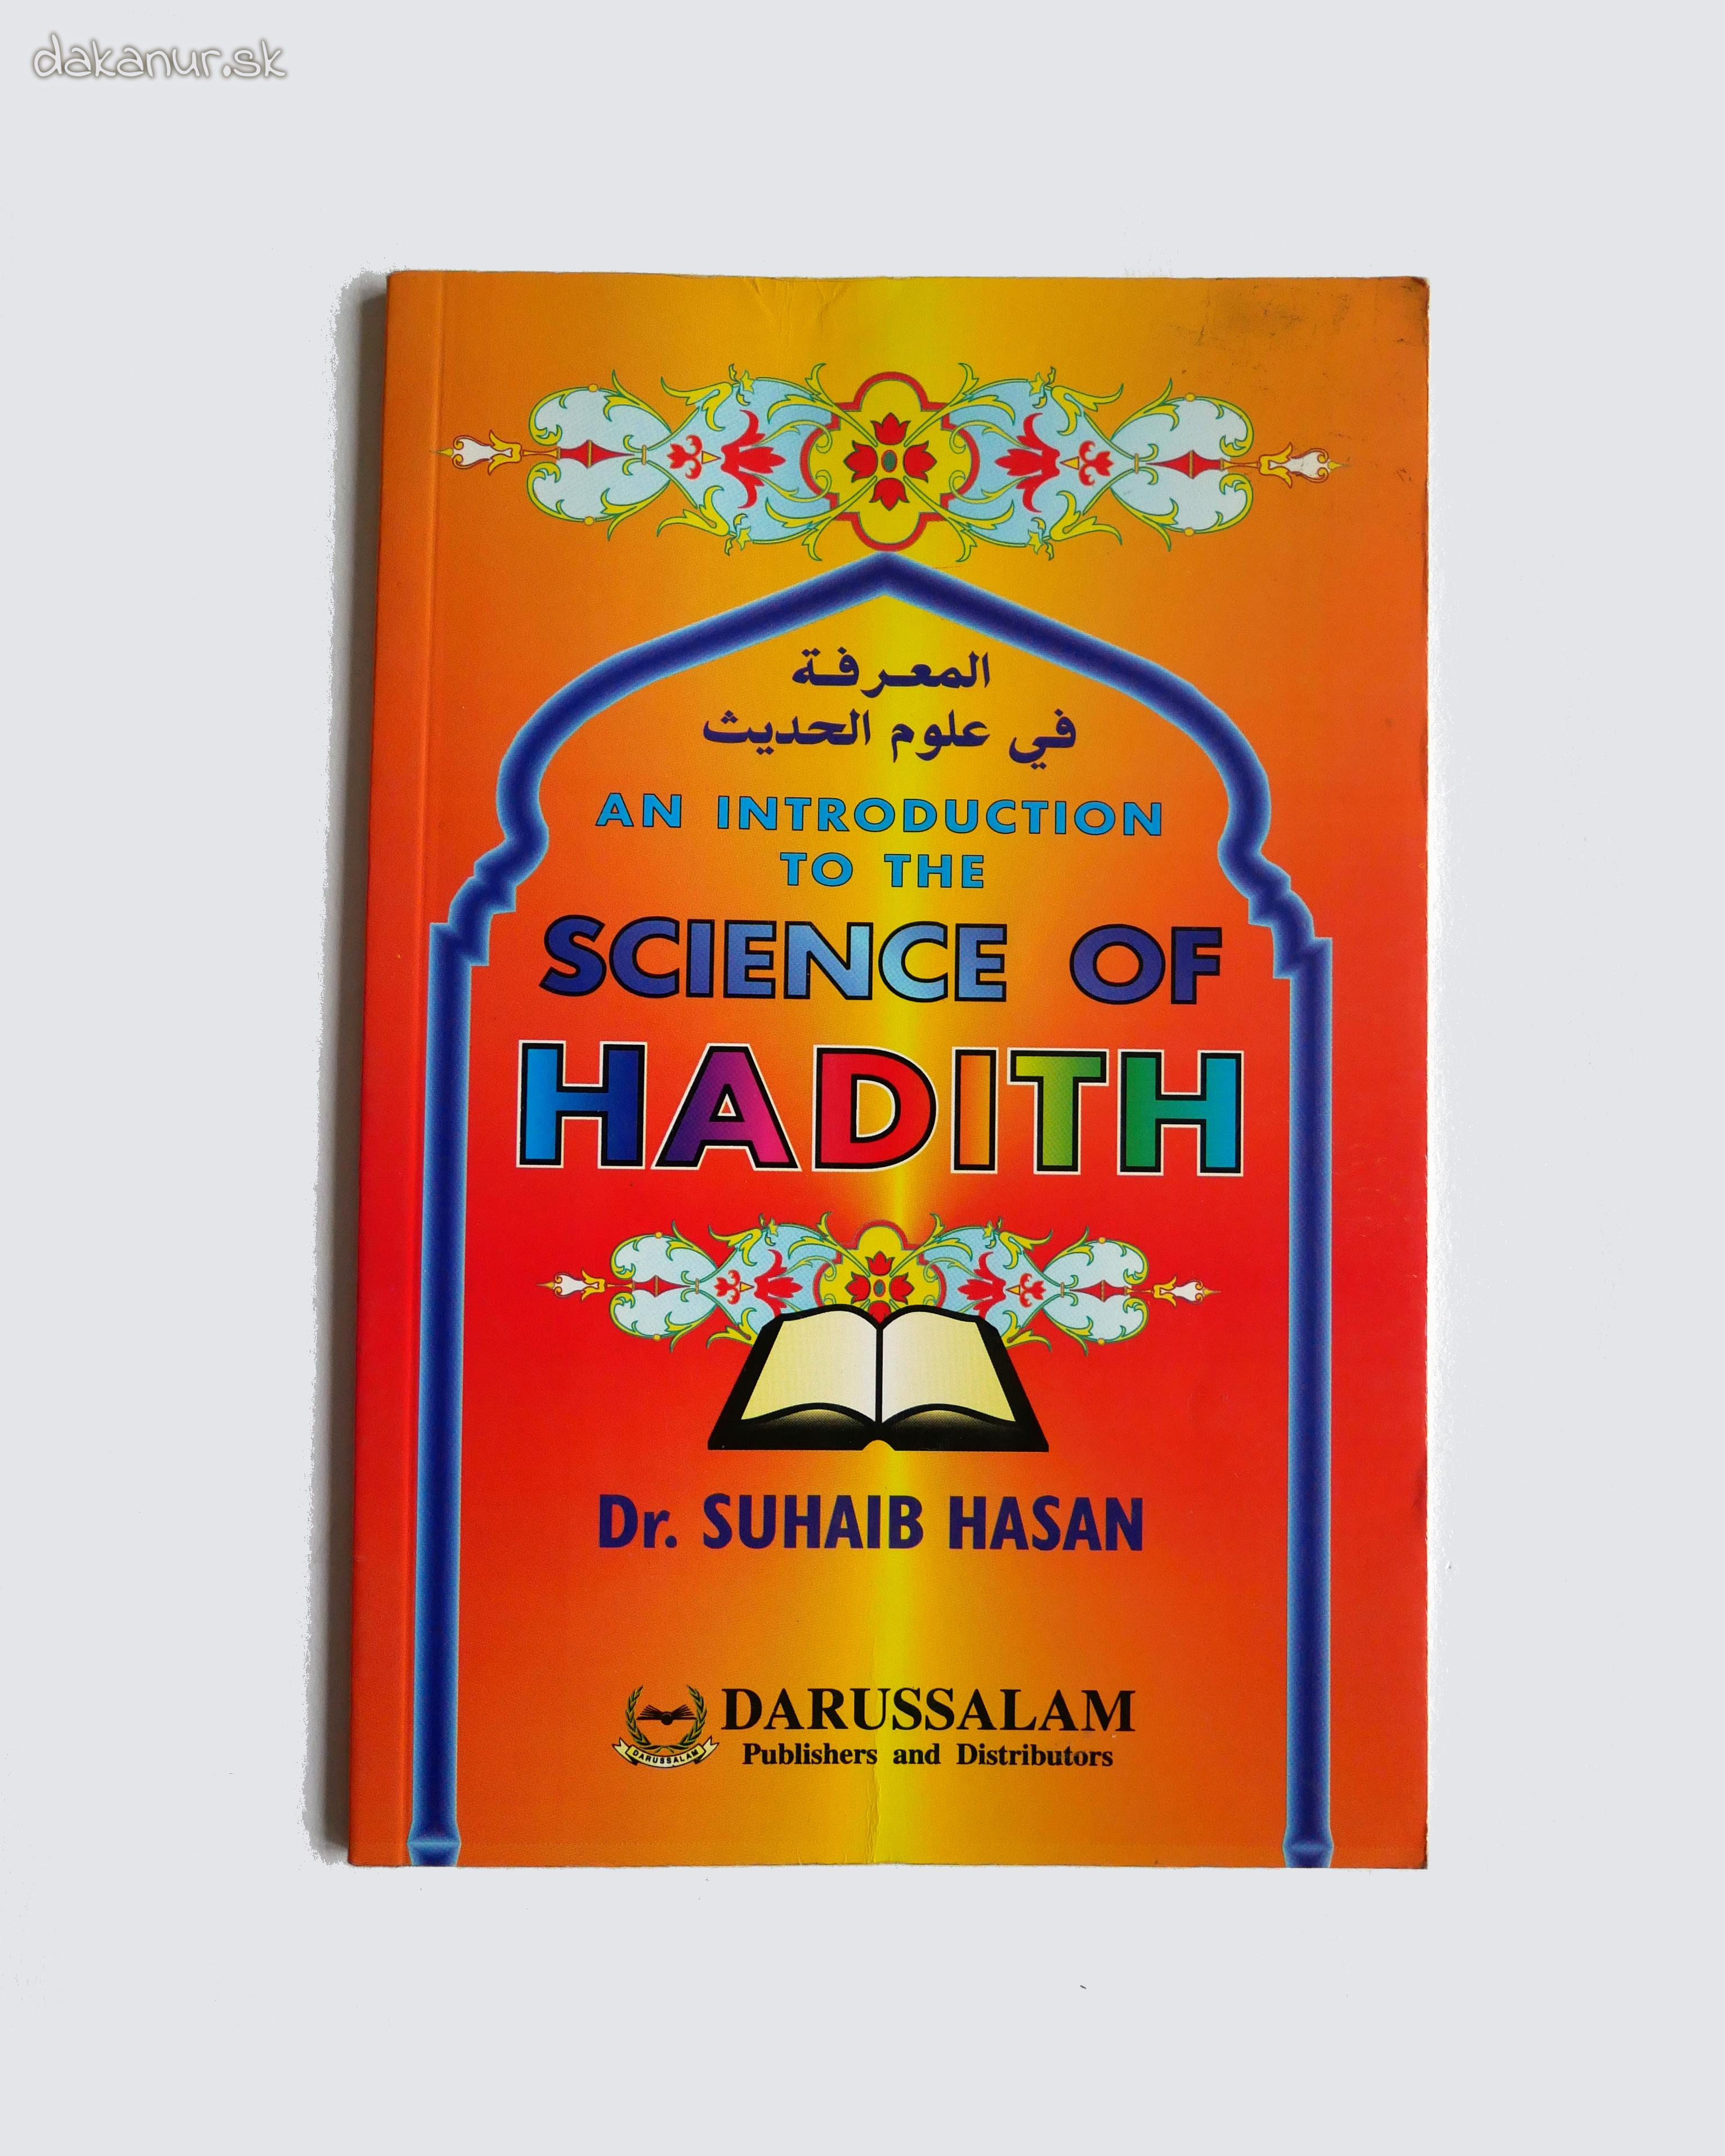 Science of hadith